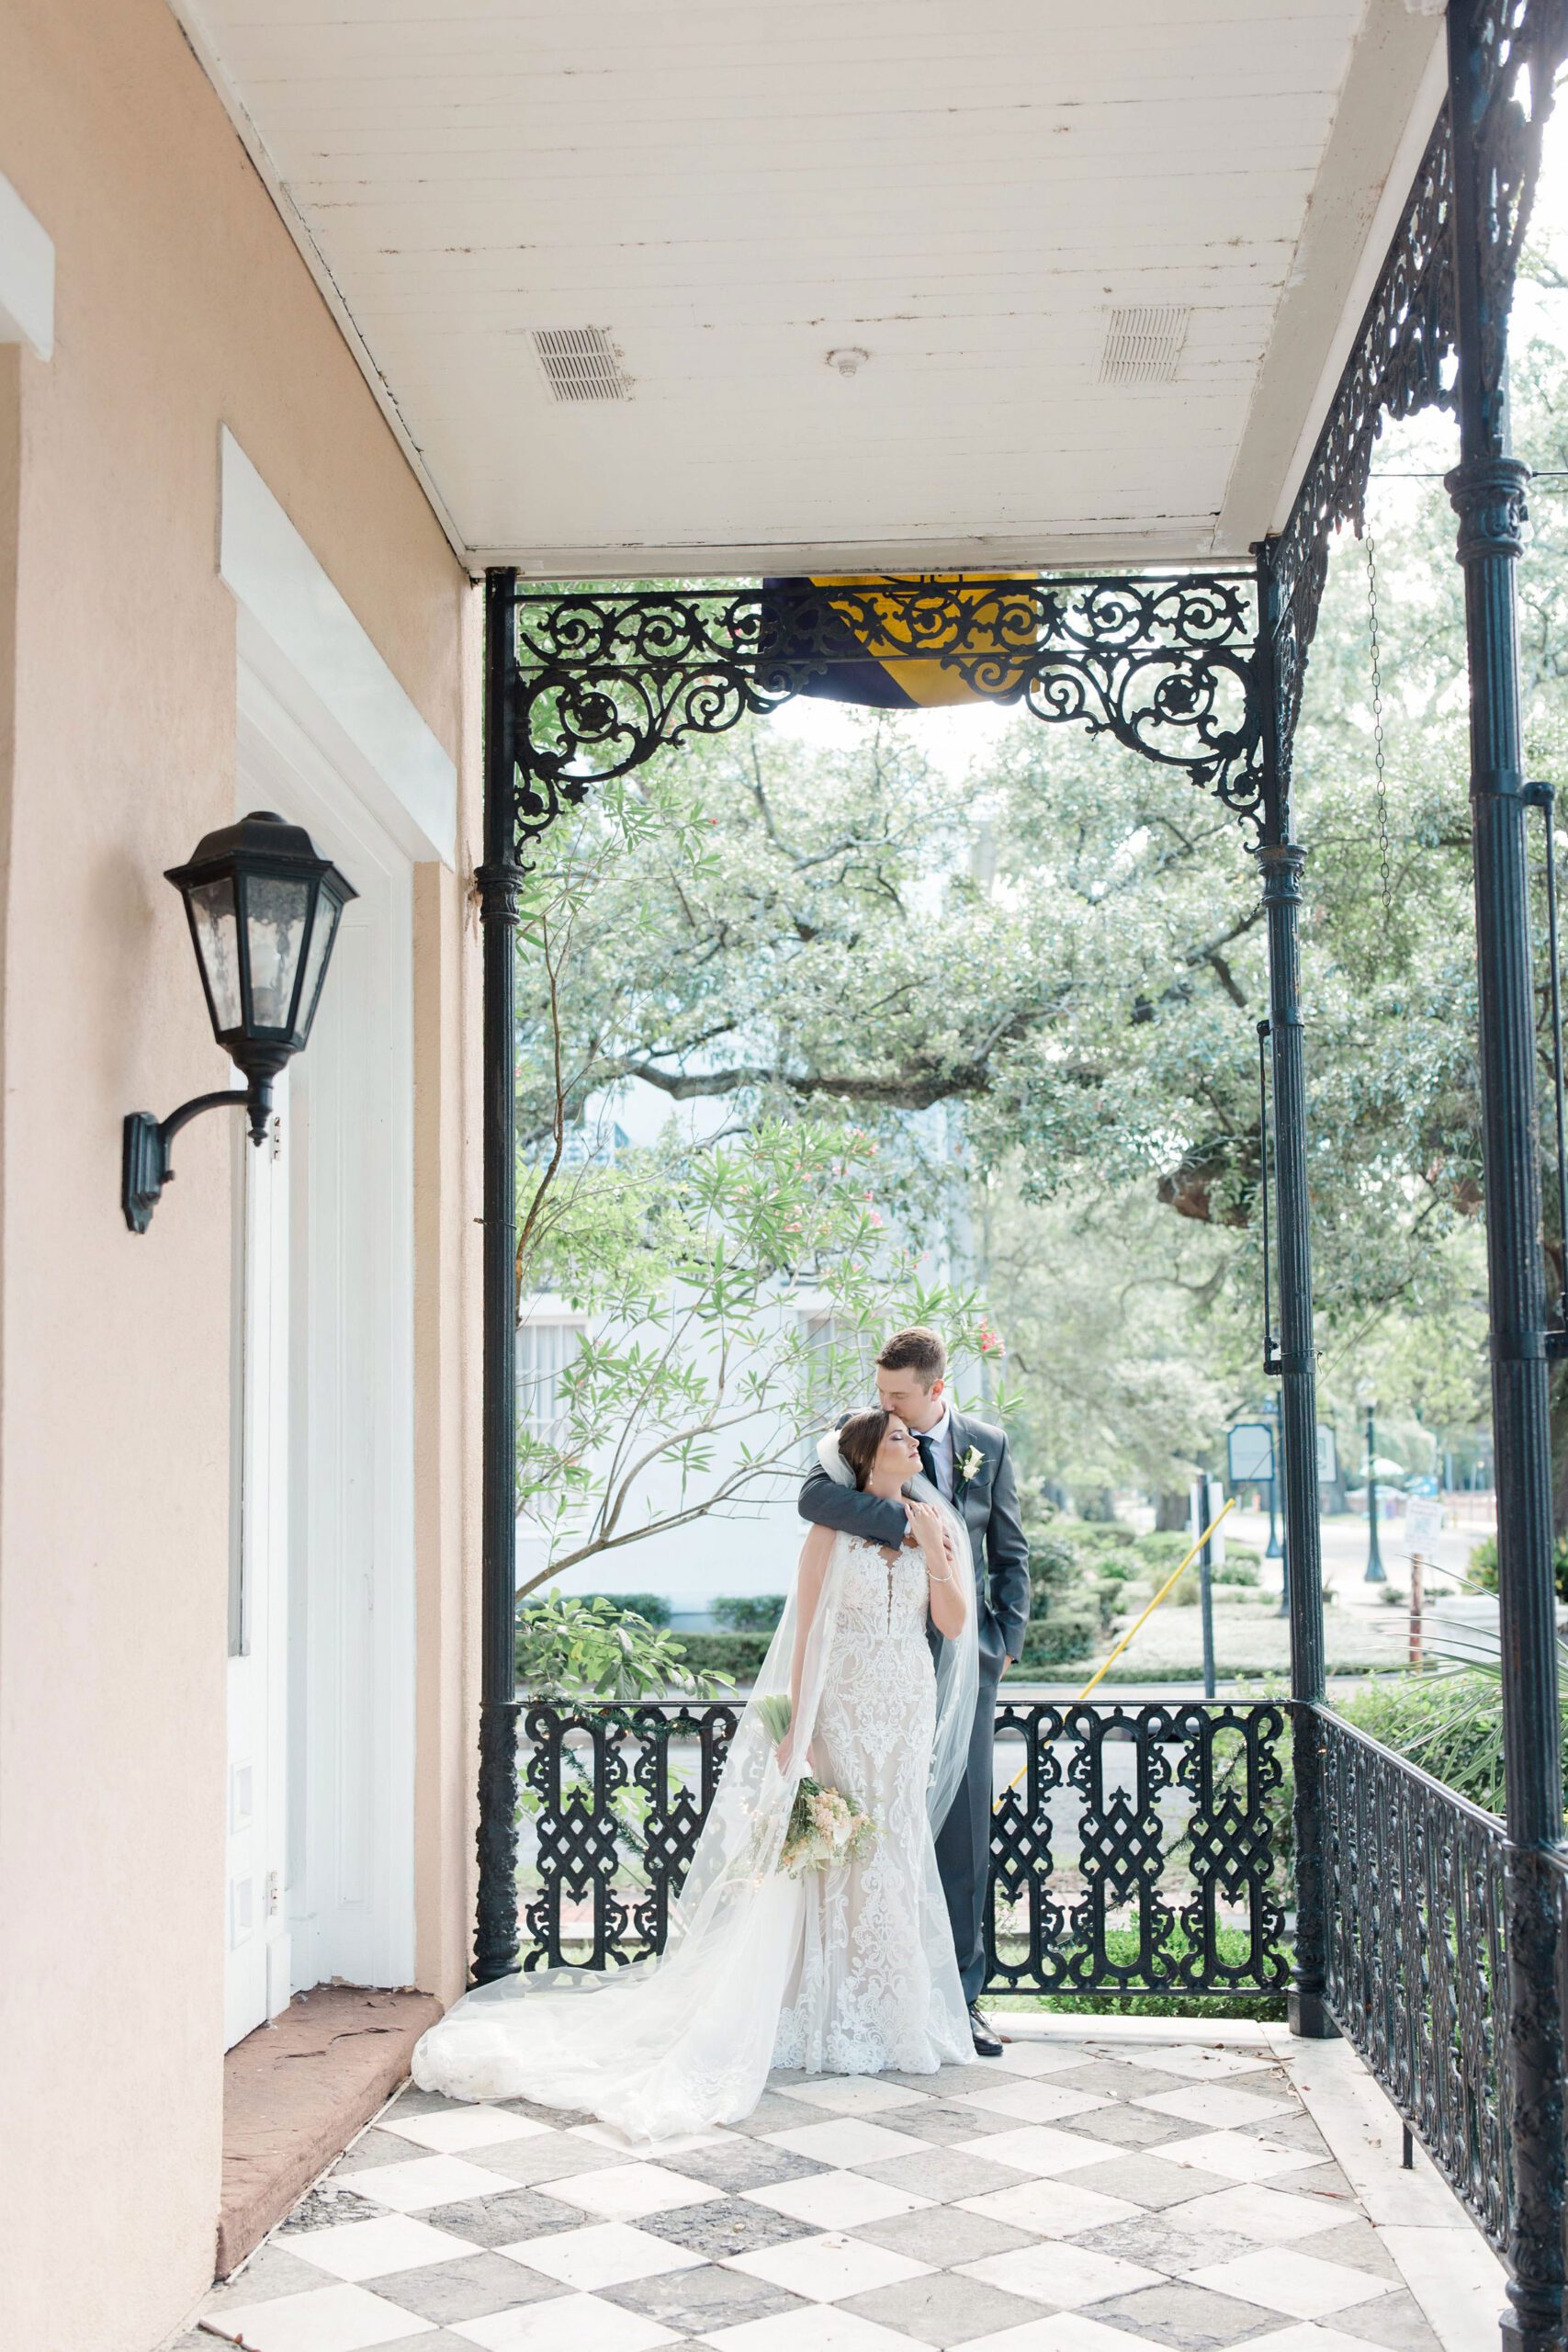 Traditional southern wedding in historic downtown Mobile, Alabama at Malaga Inn.